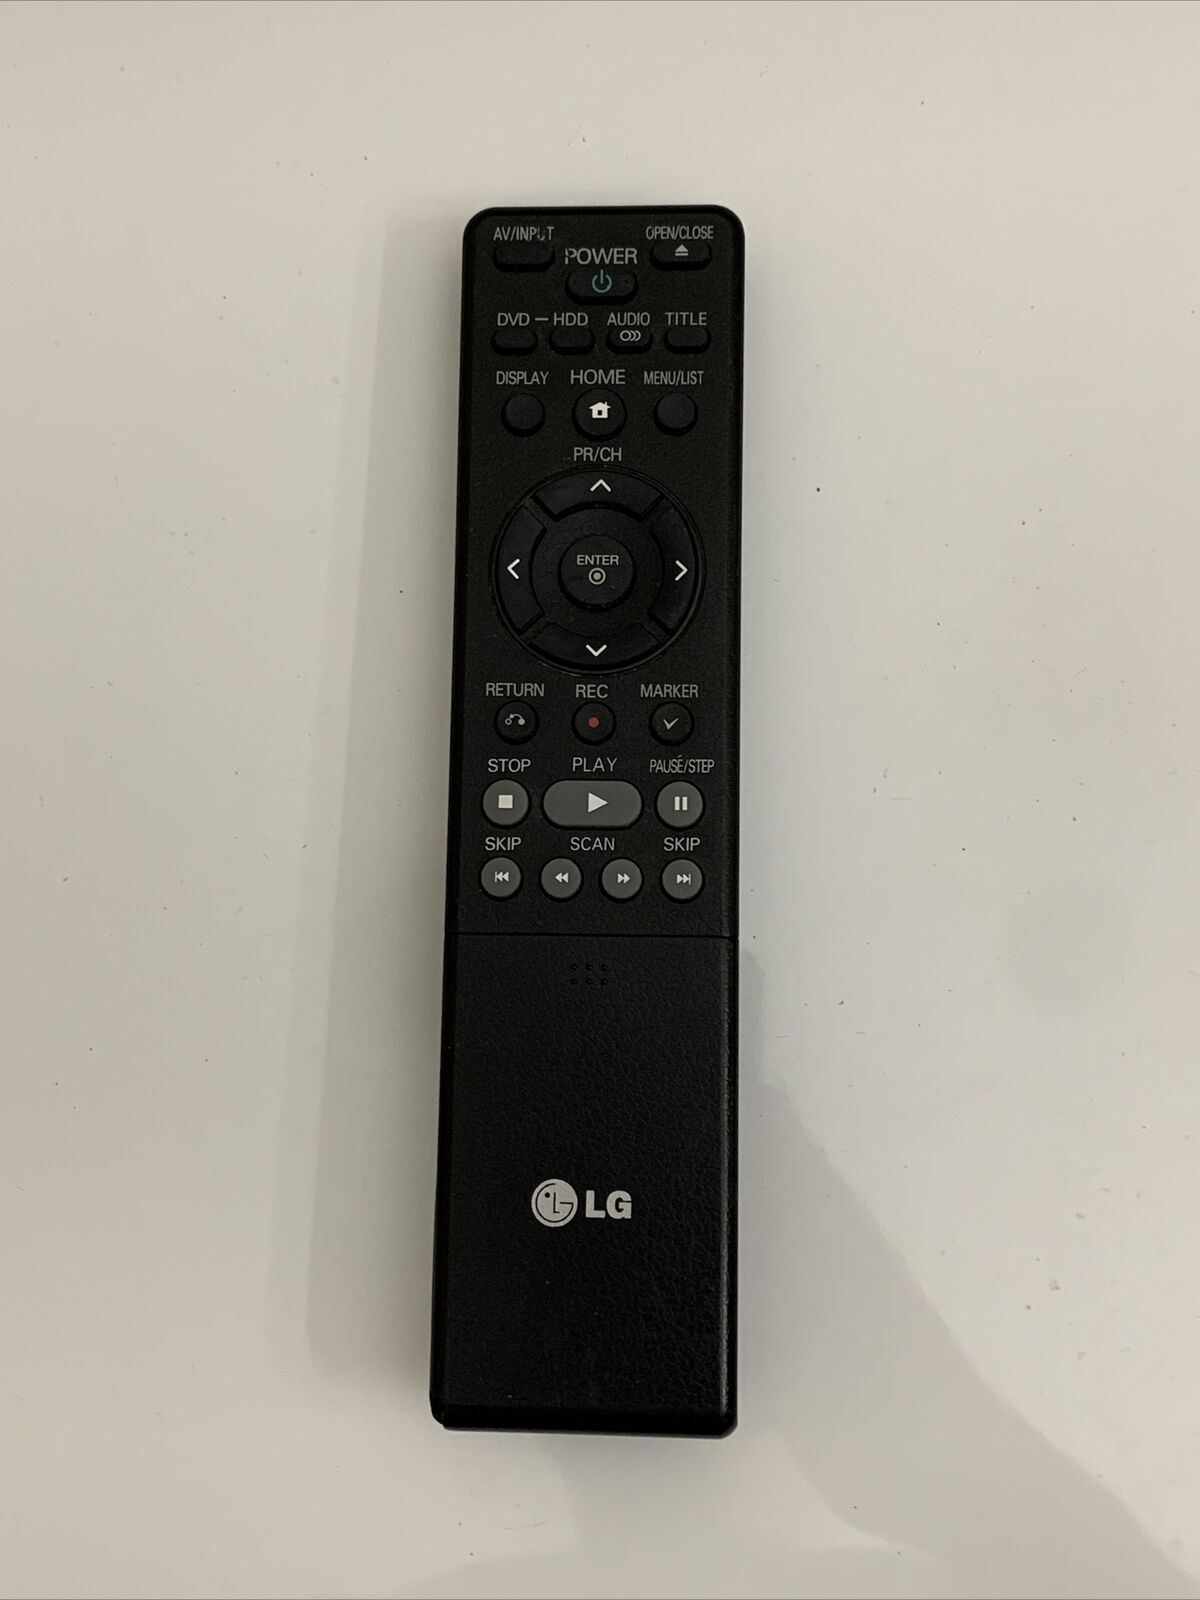 LG AKB35960103 Remote Control for LG DVD HDD Recorder *Missing Battery Lid